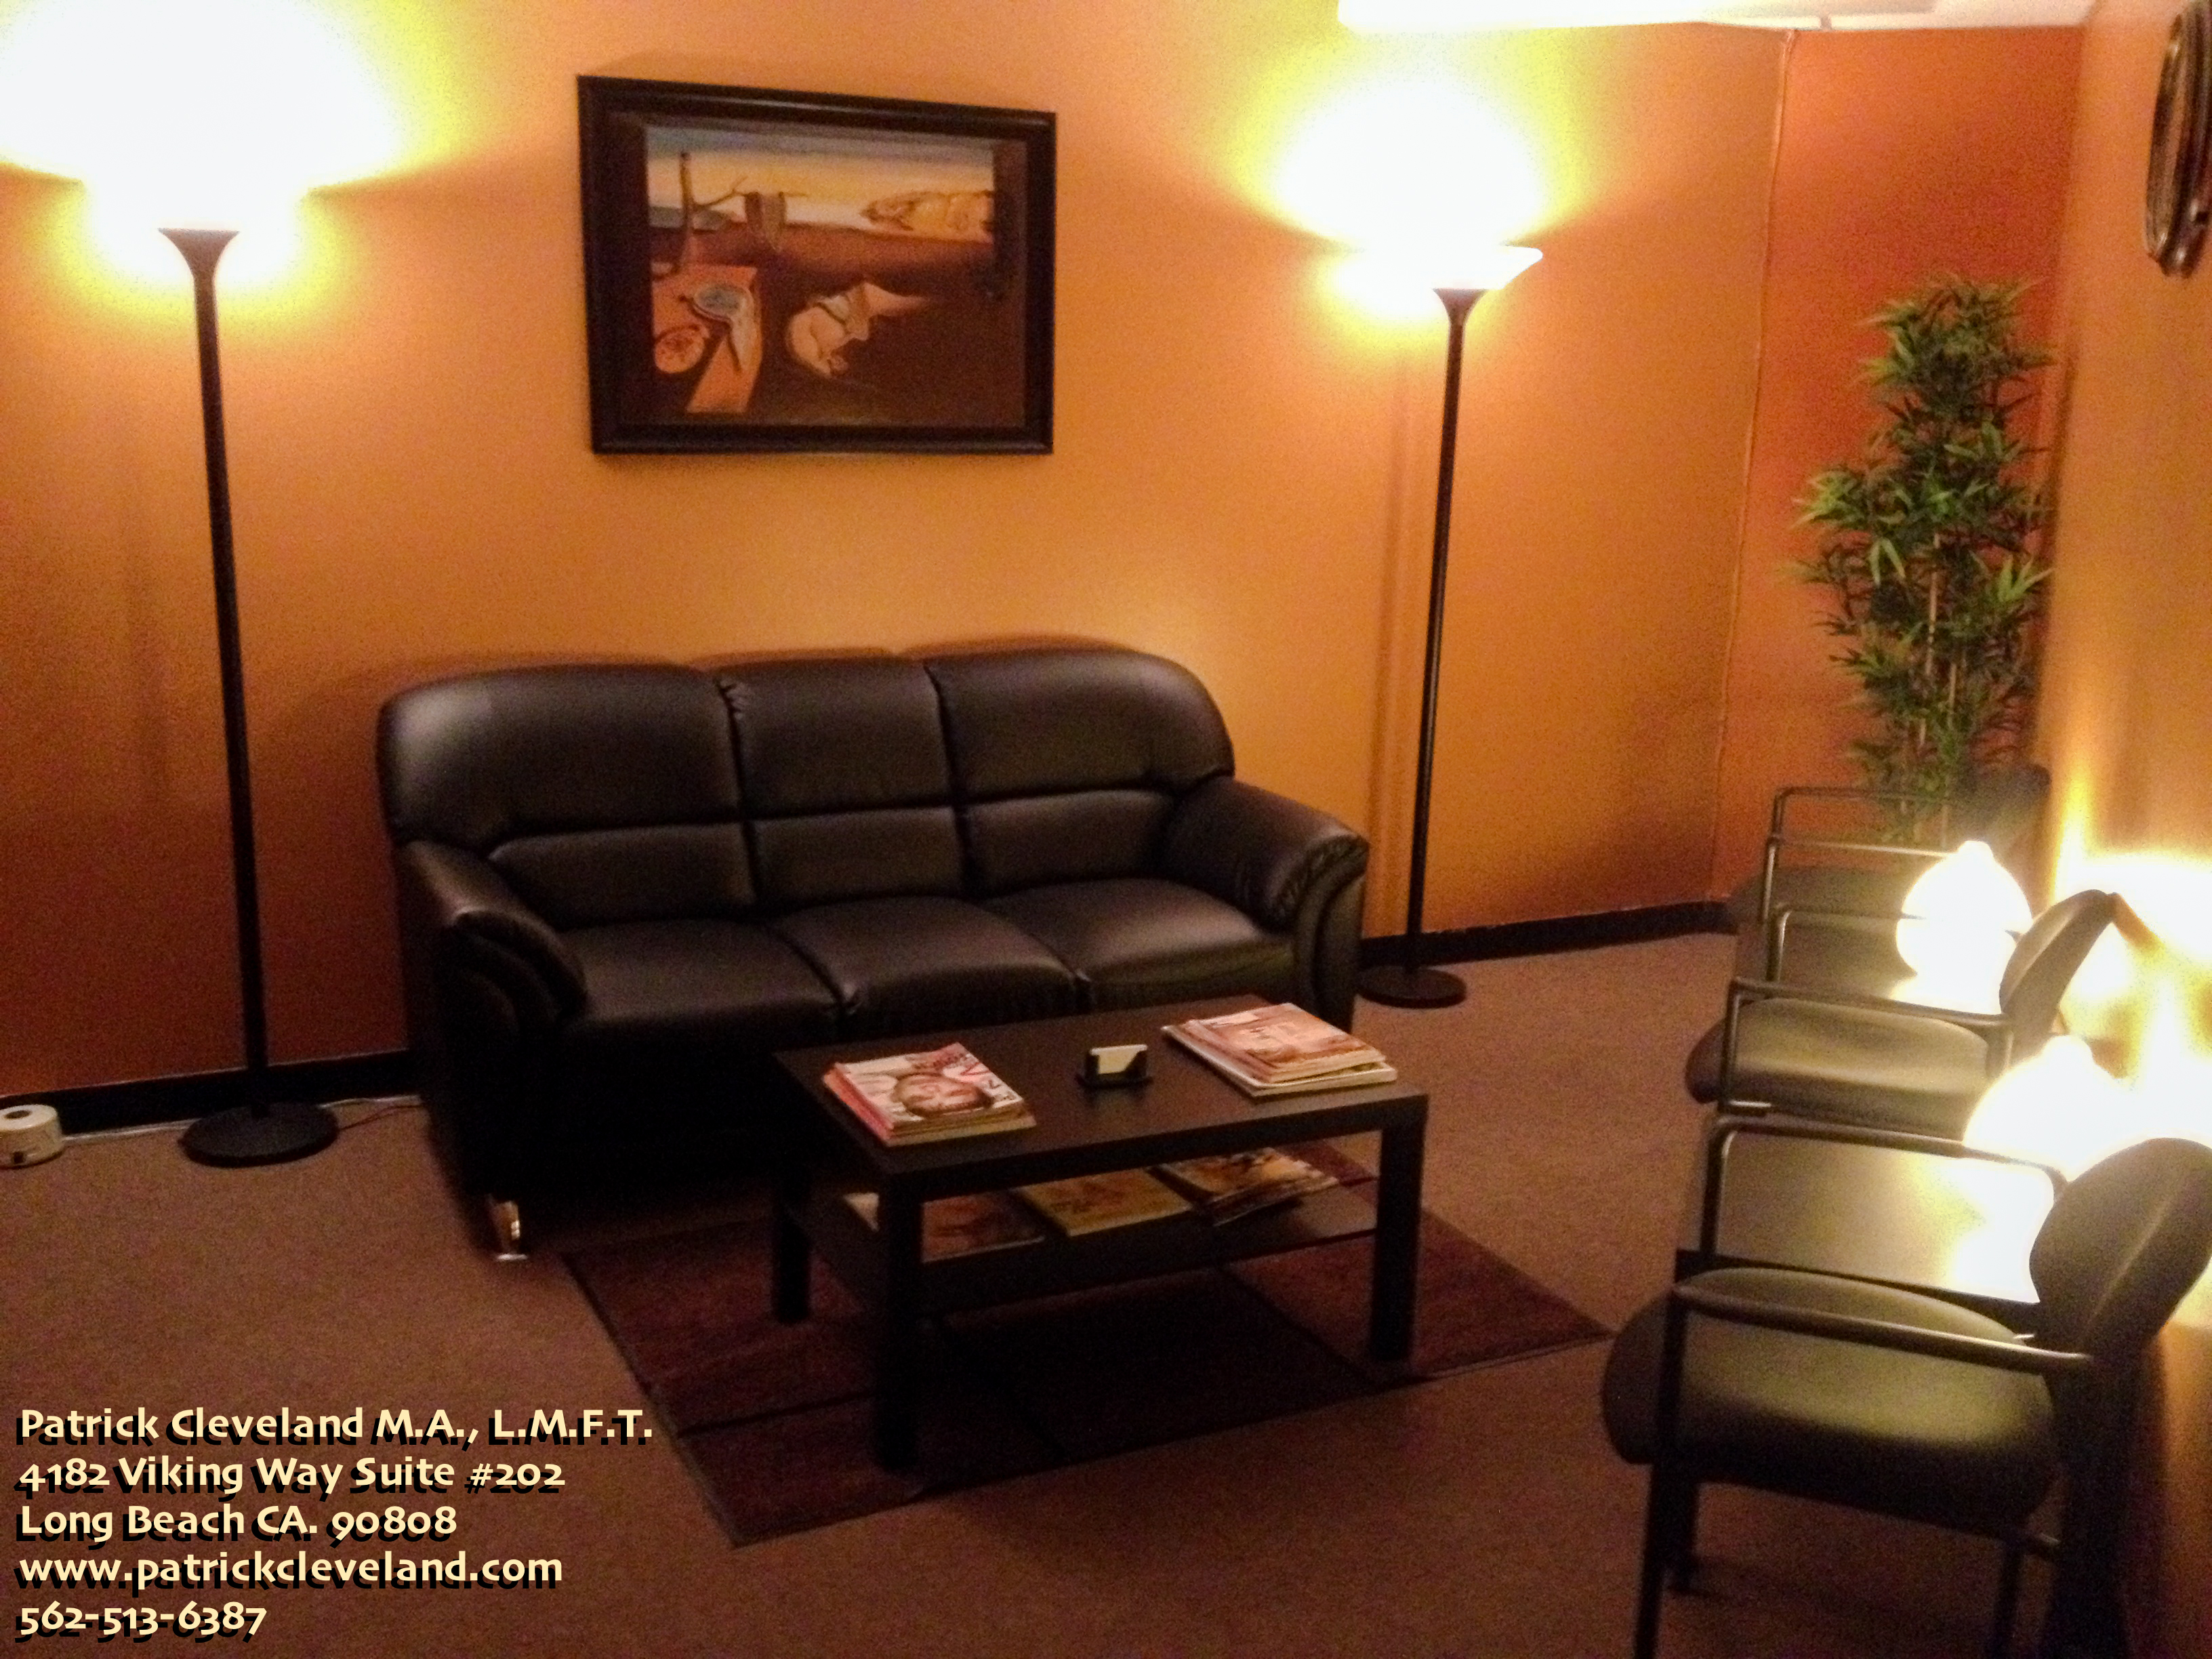 Daybreak Counseling Center Suite #202 Waiting Room 